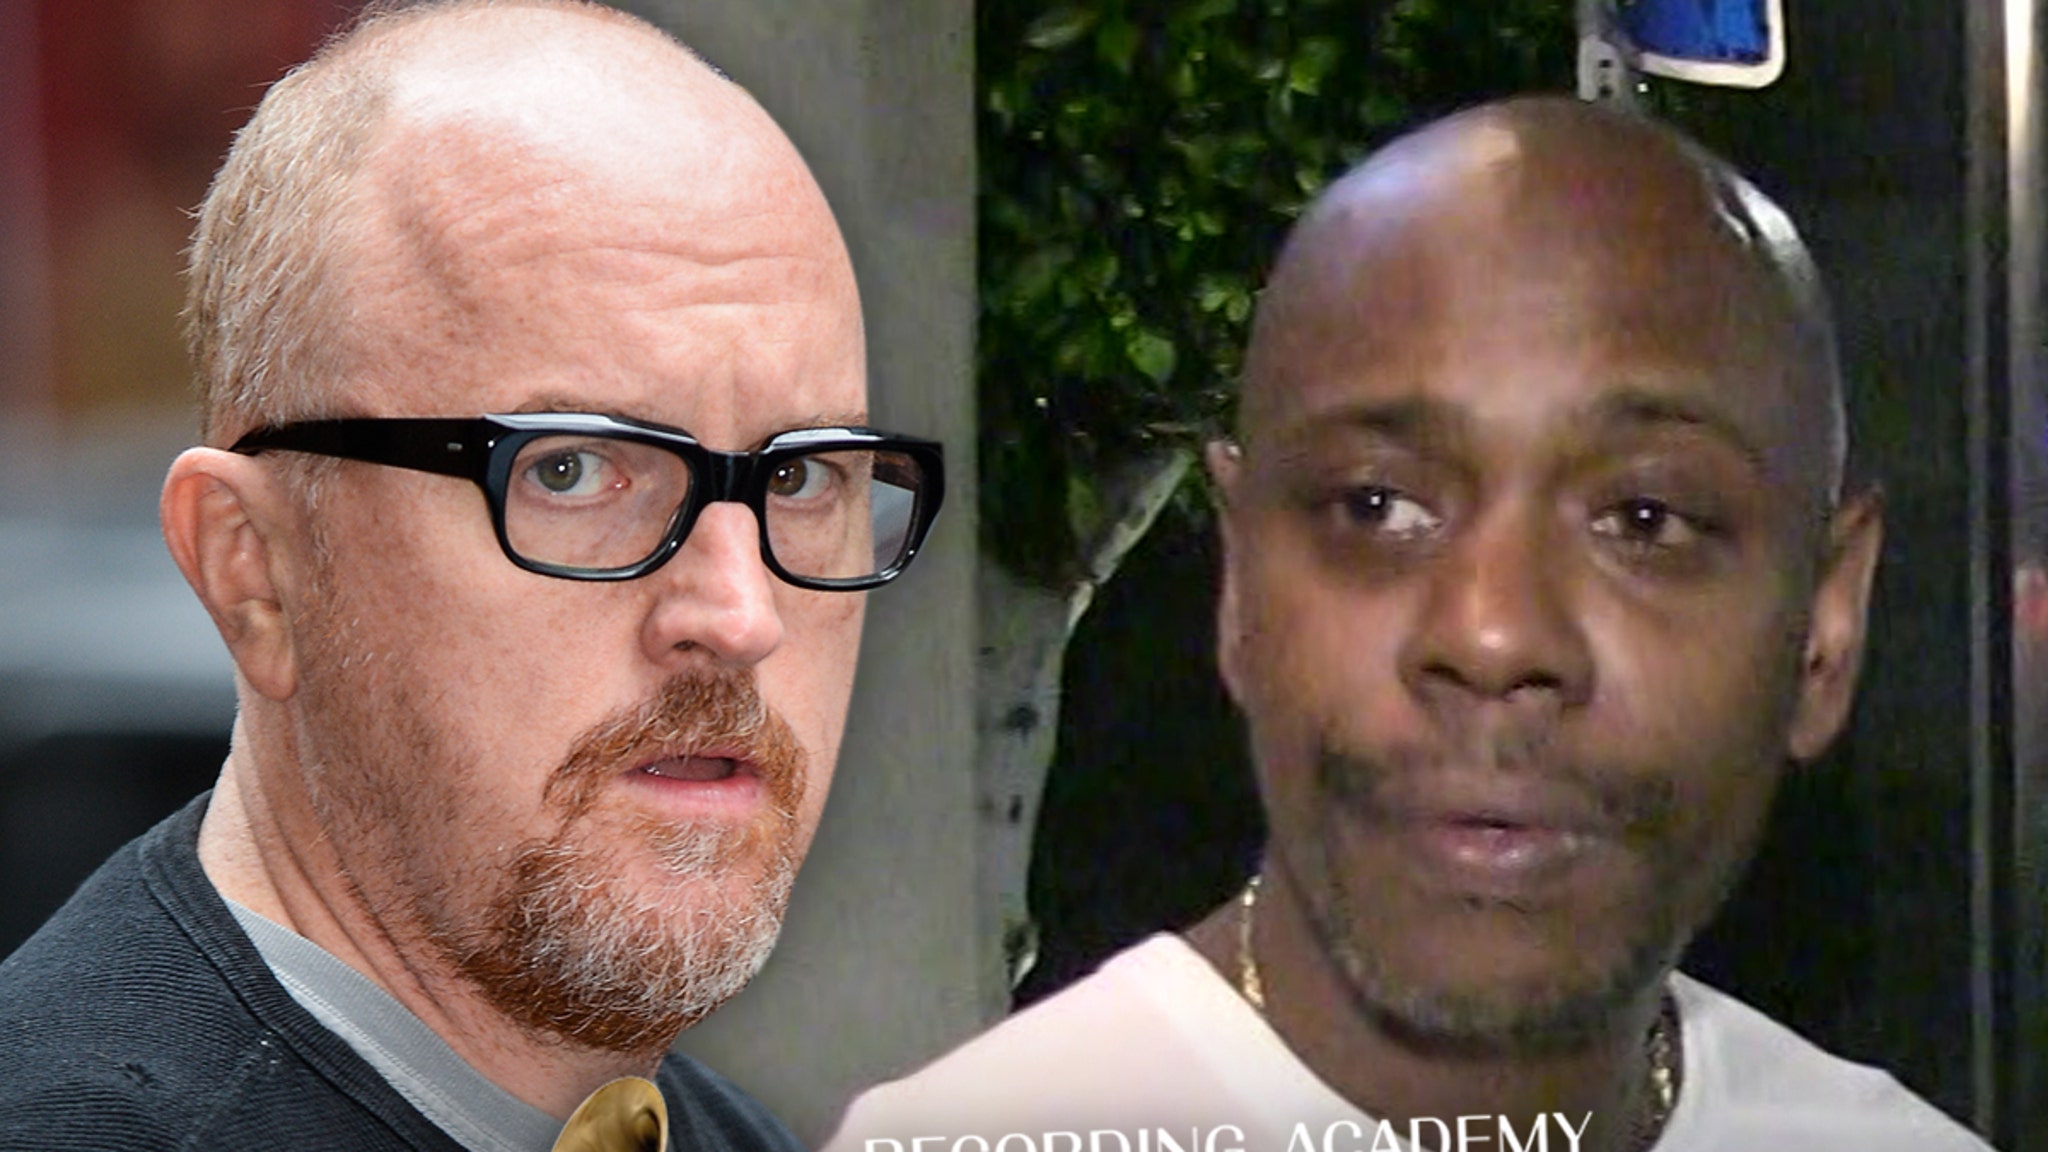 Dave Chappelle and Louis C.K. Nominated for Grammys, Cancel Culture Canceled?